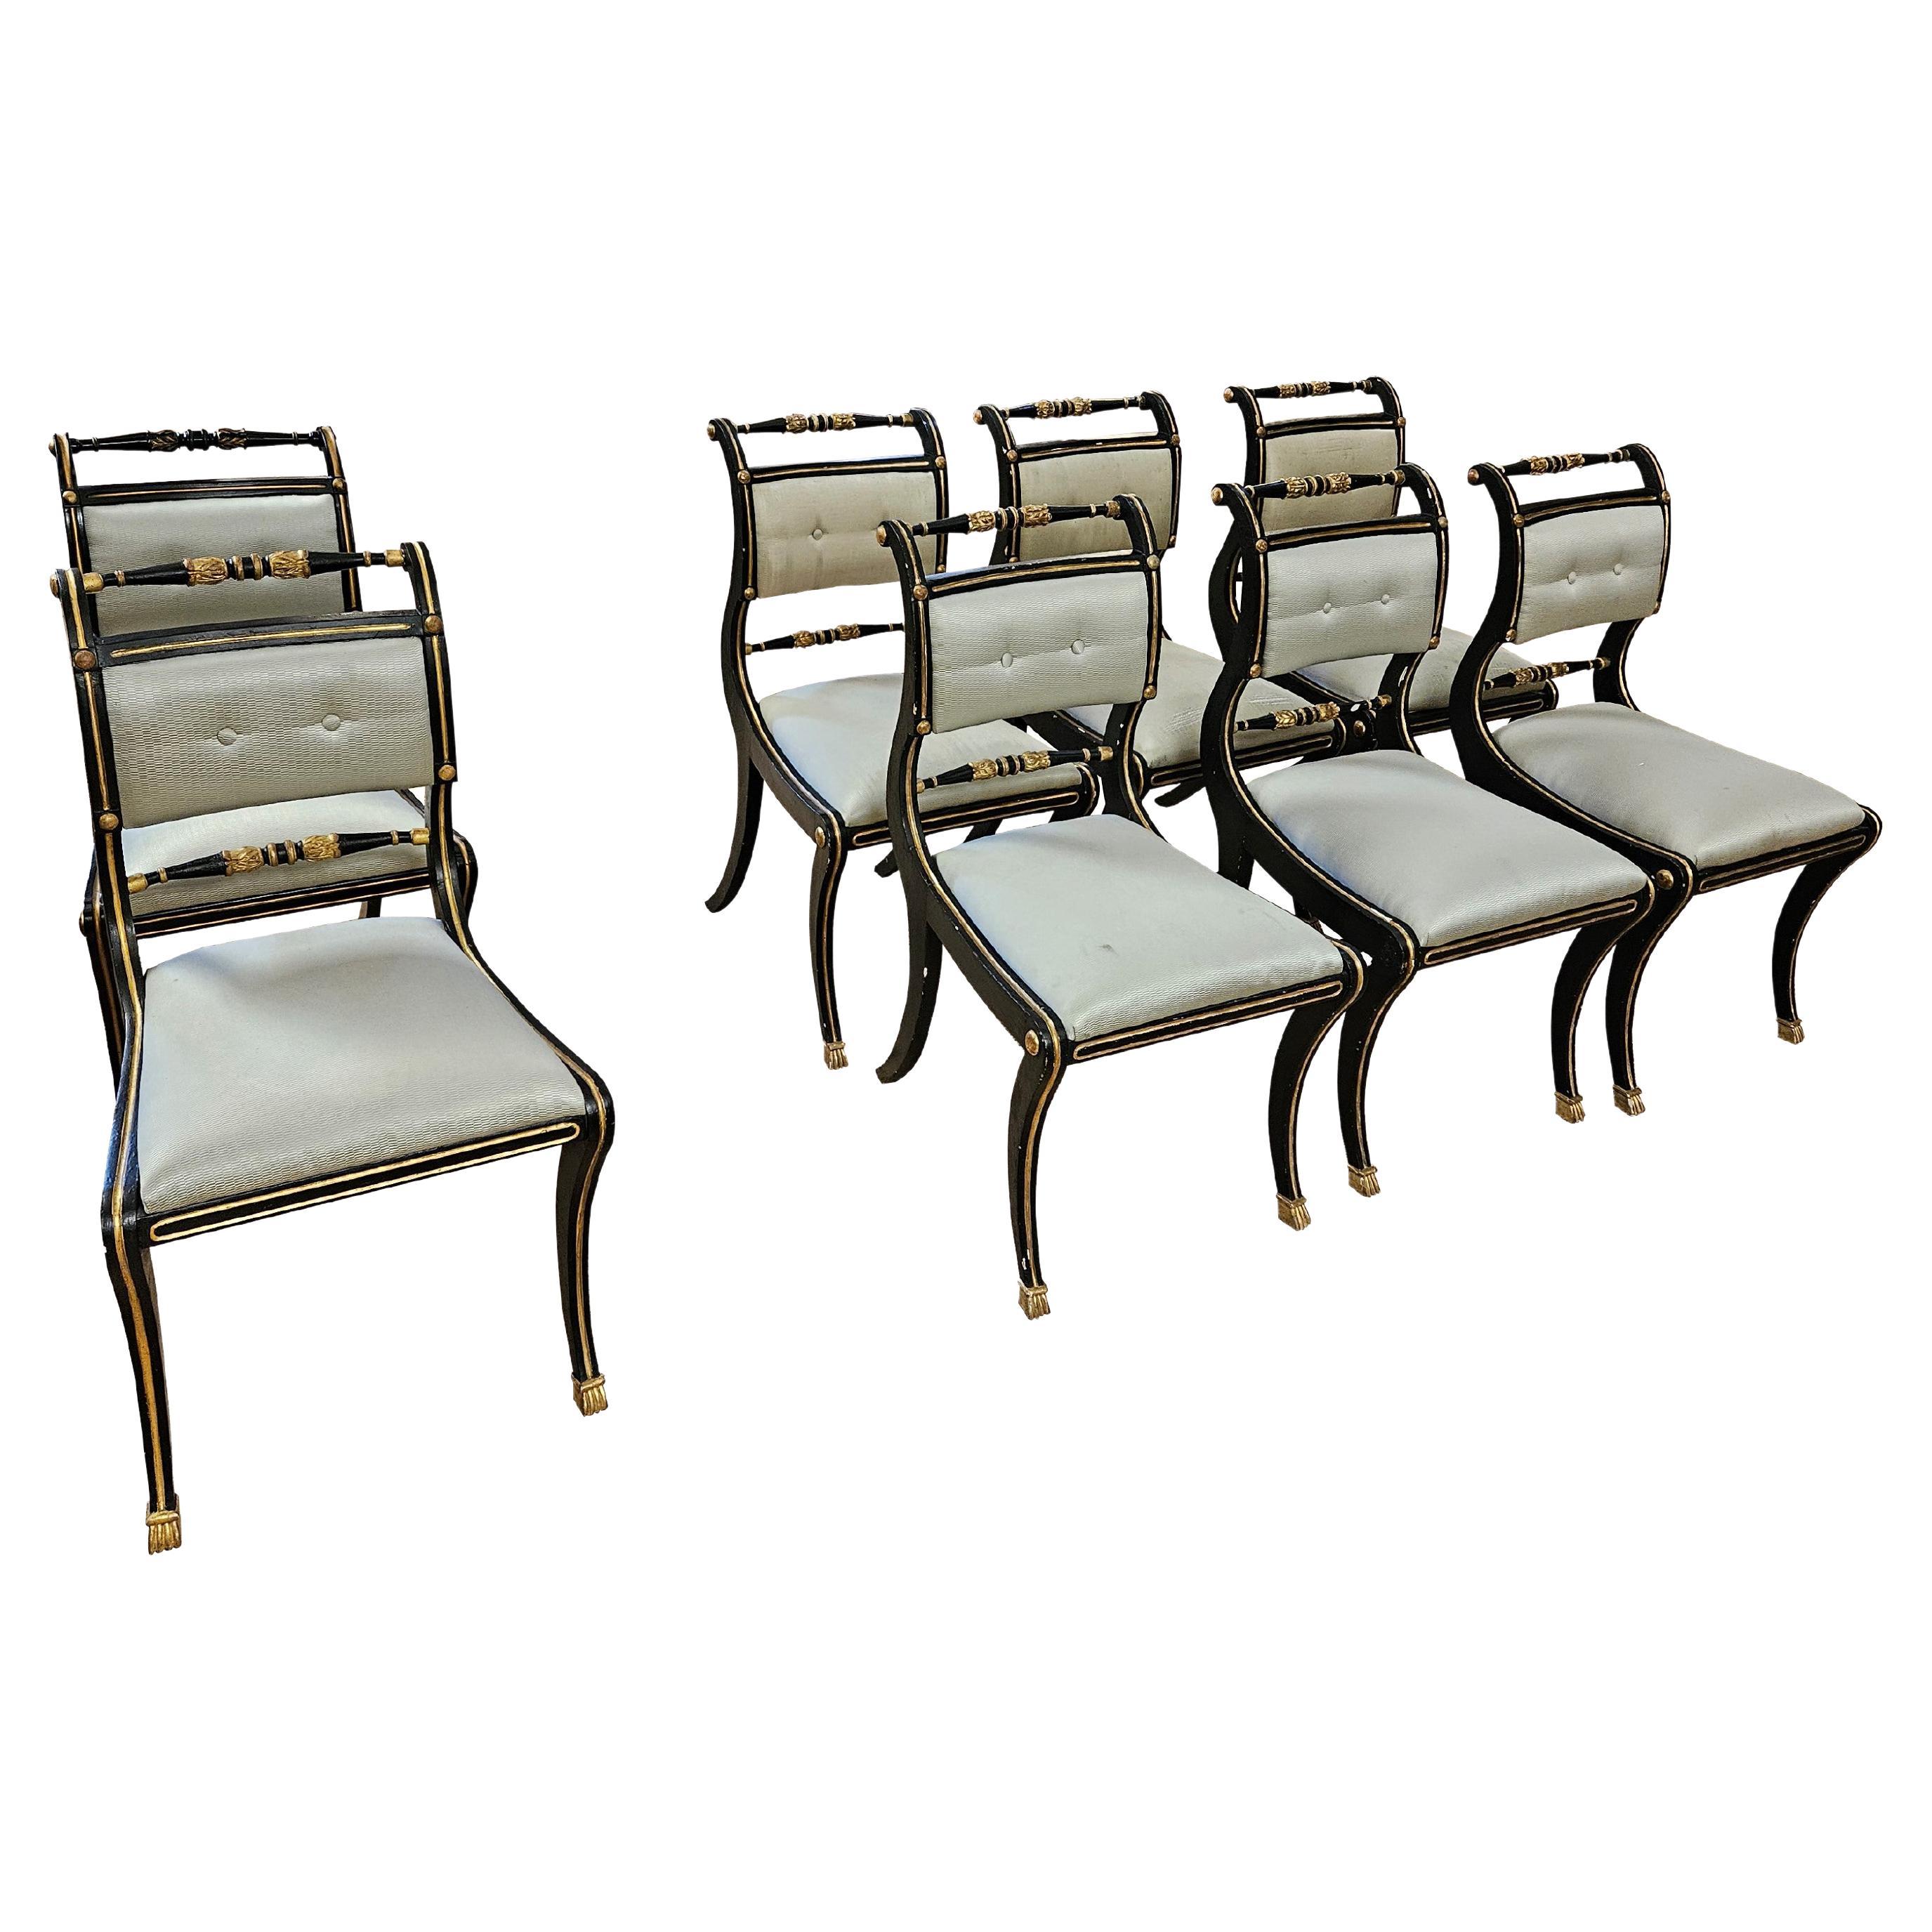 Set of eight (6+2) Regency-style chairs